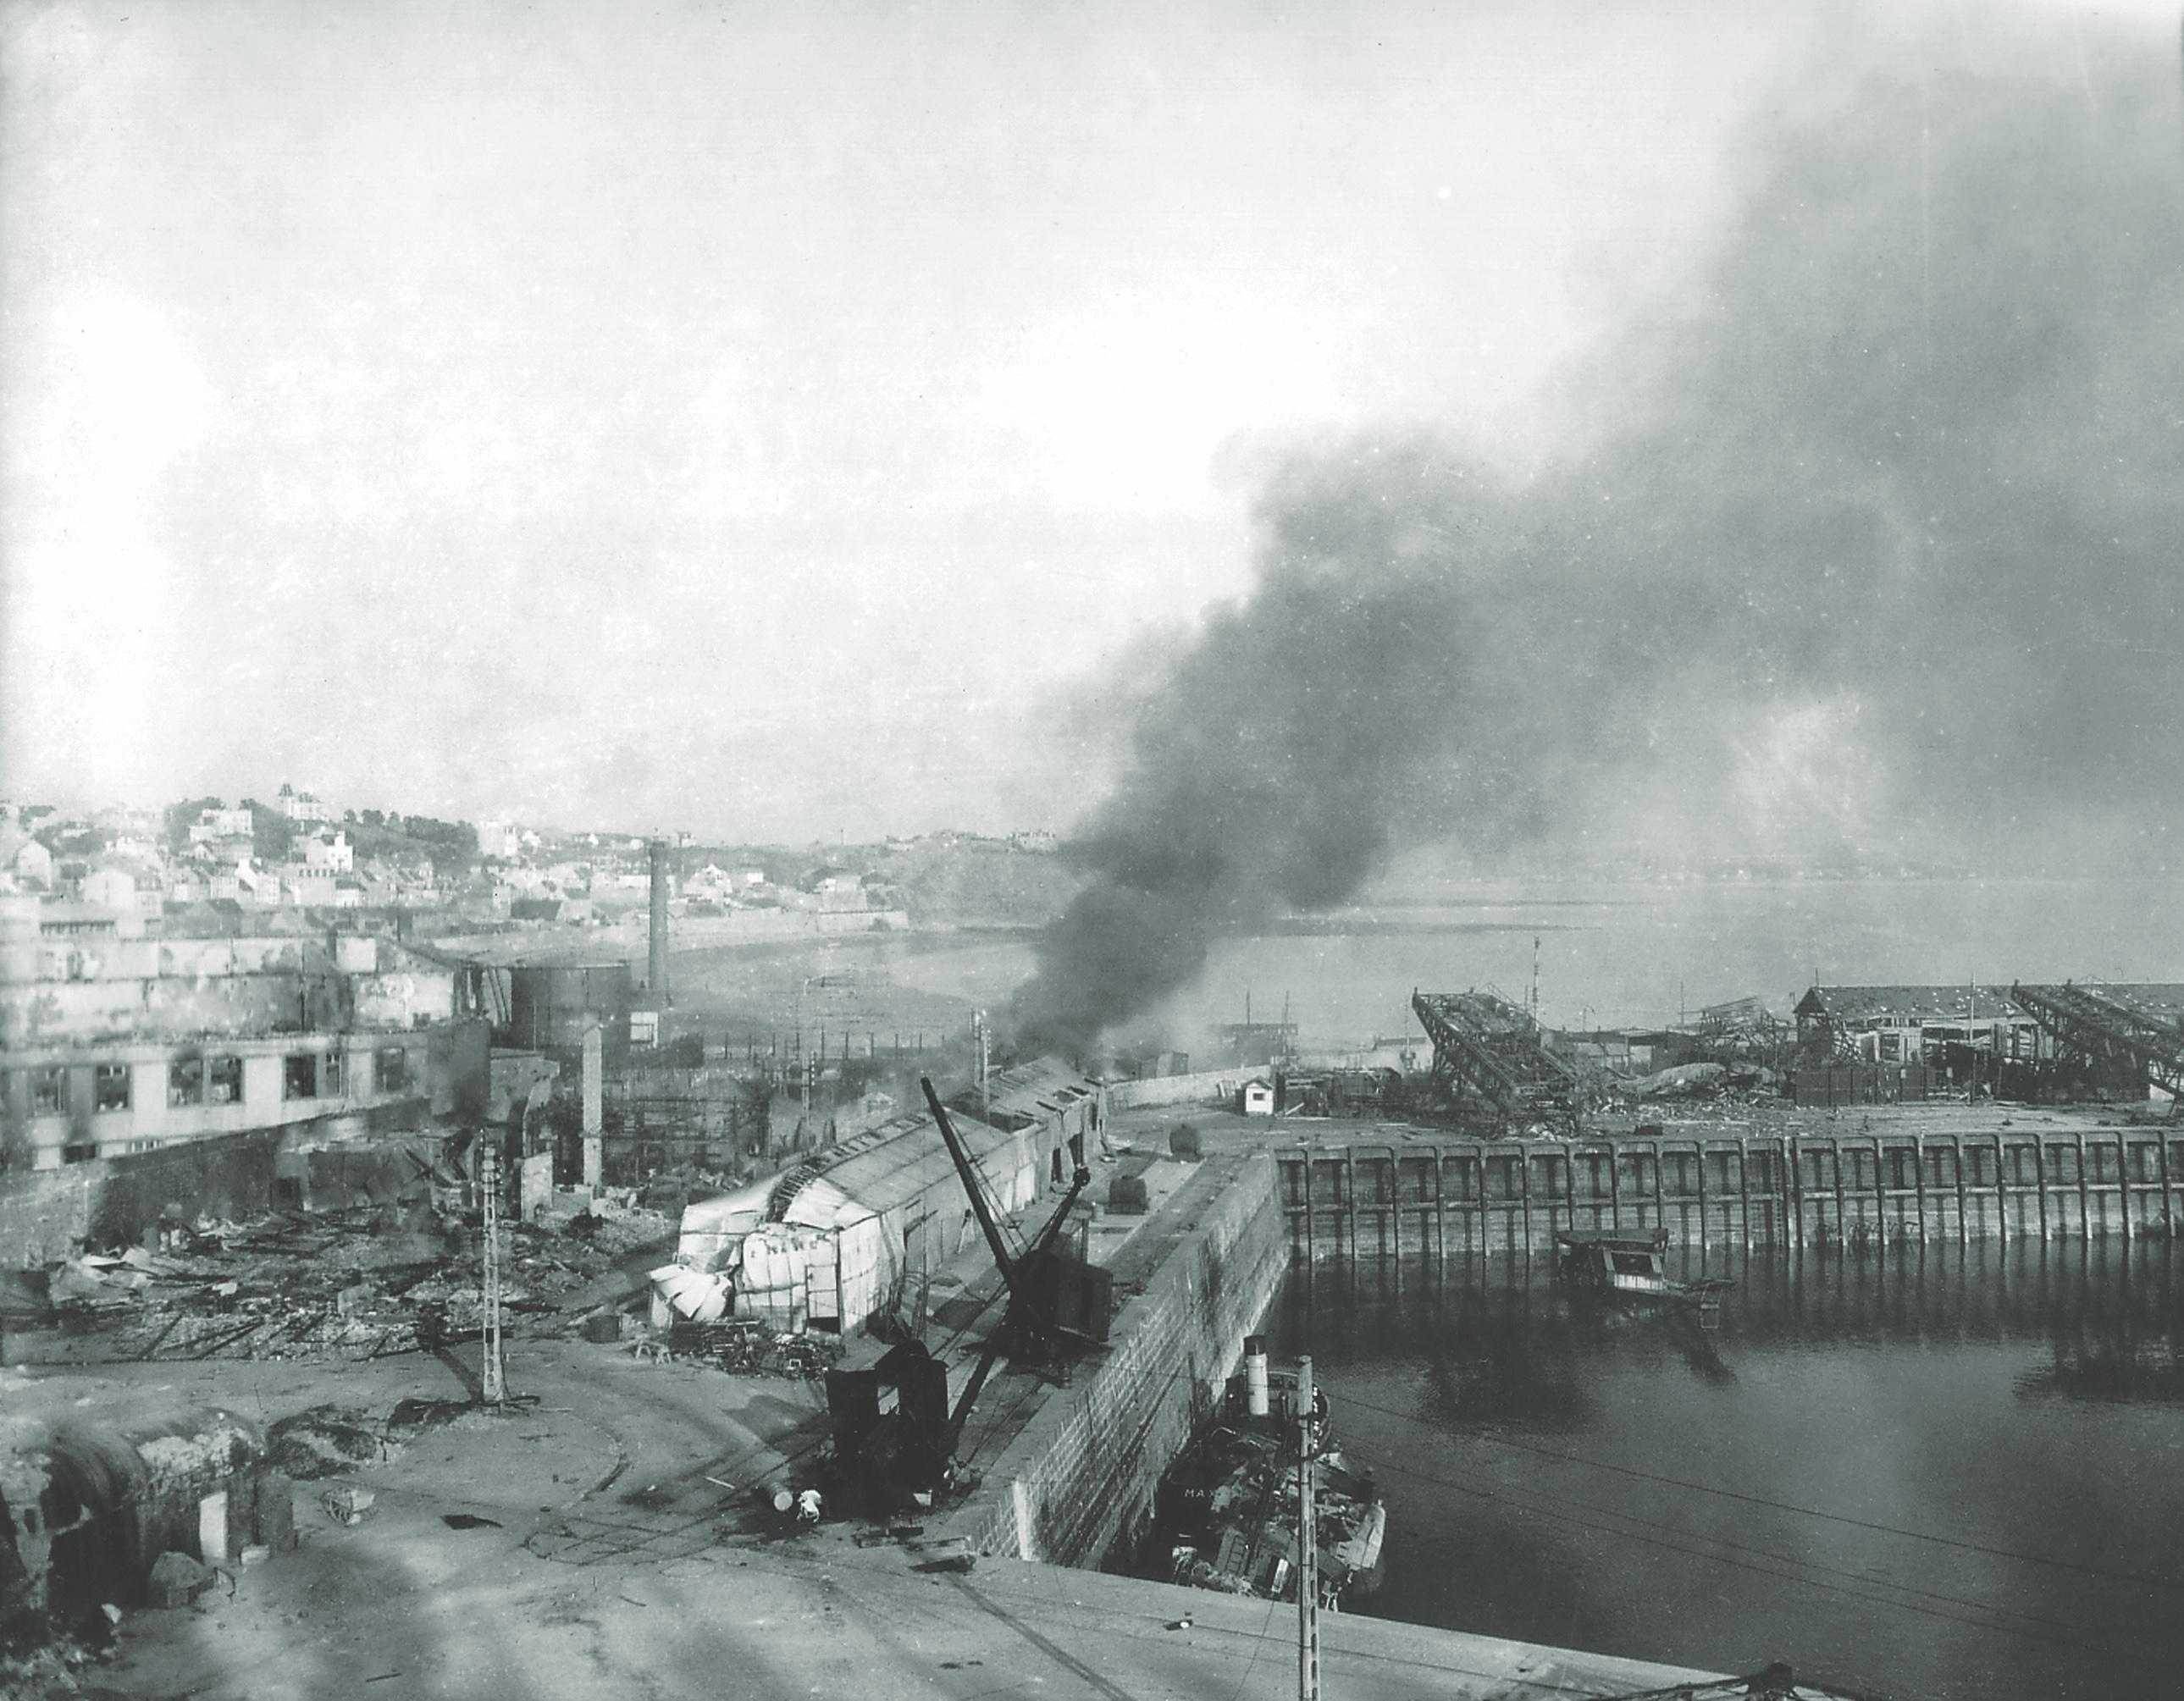 Large fires spread through the docks in Granville on March 9, 1945. “Enemy forces seem to have withdrawn,” a British soldier wrote in his diary, “though heavy explosions are going on intermittently and fires burning.” (Photosnormandie)